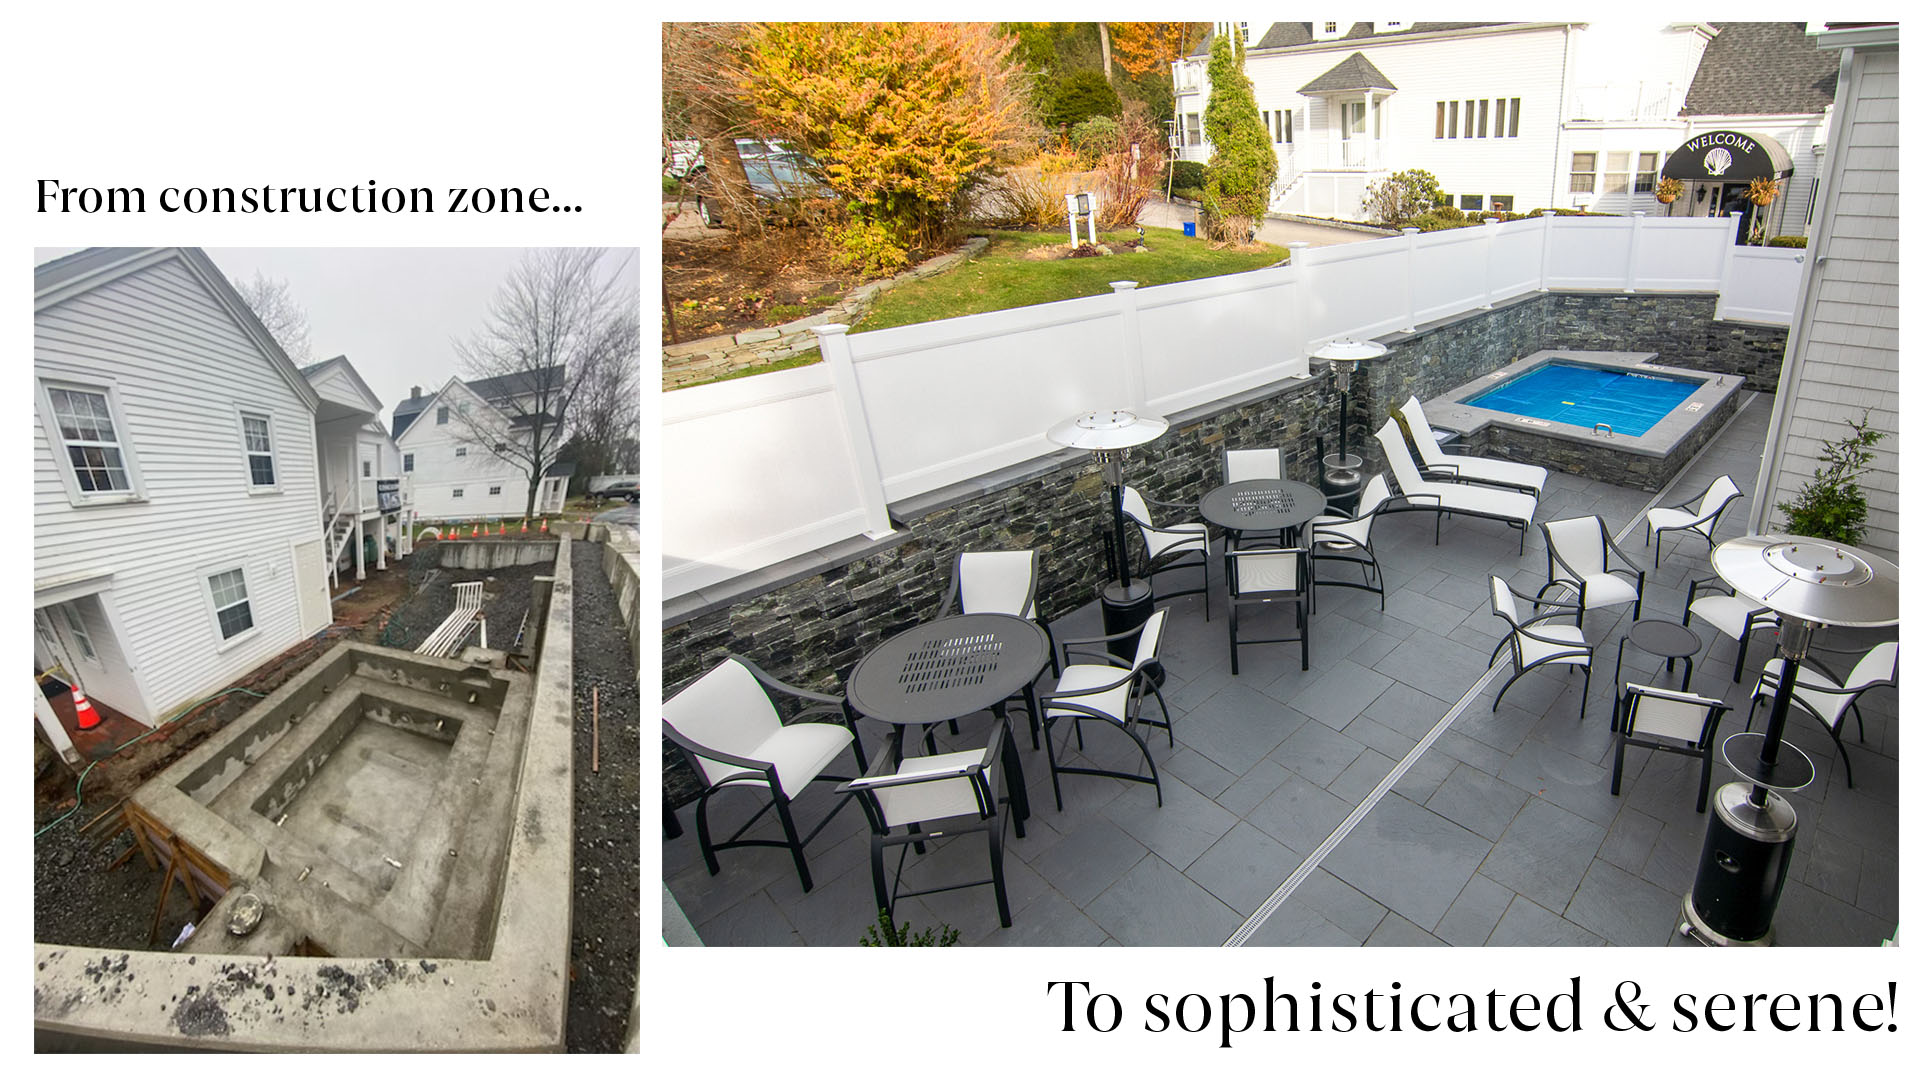 A before and after showing a muddy, partially built patio and the finished project with grey slate floor, grey stone wall with white panel top, in-ground hot tub, and patio furniture